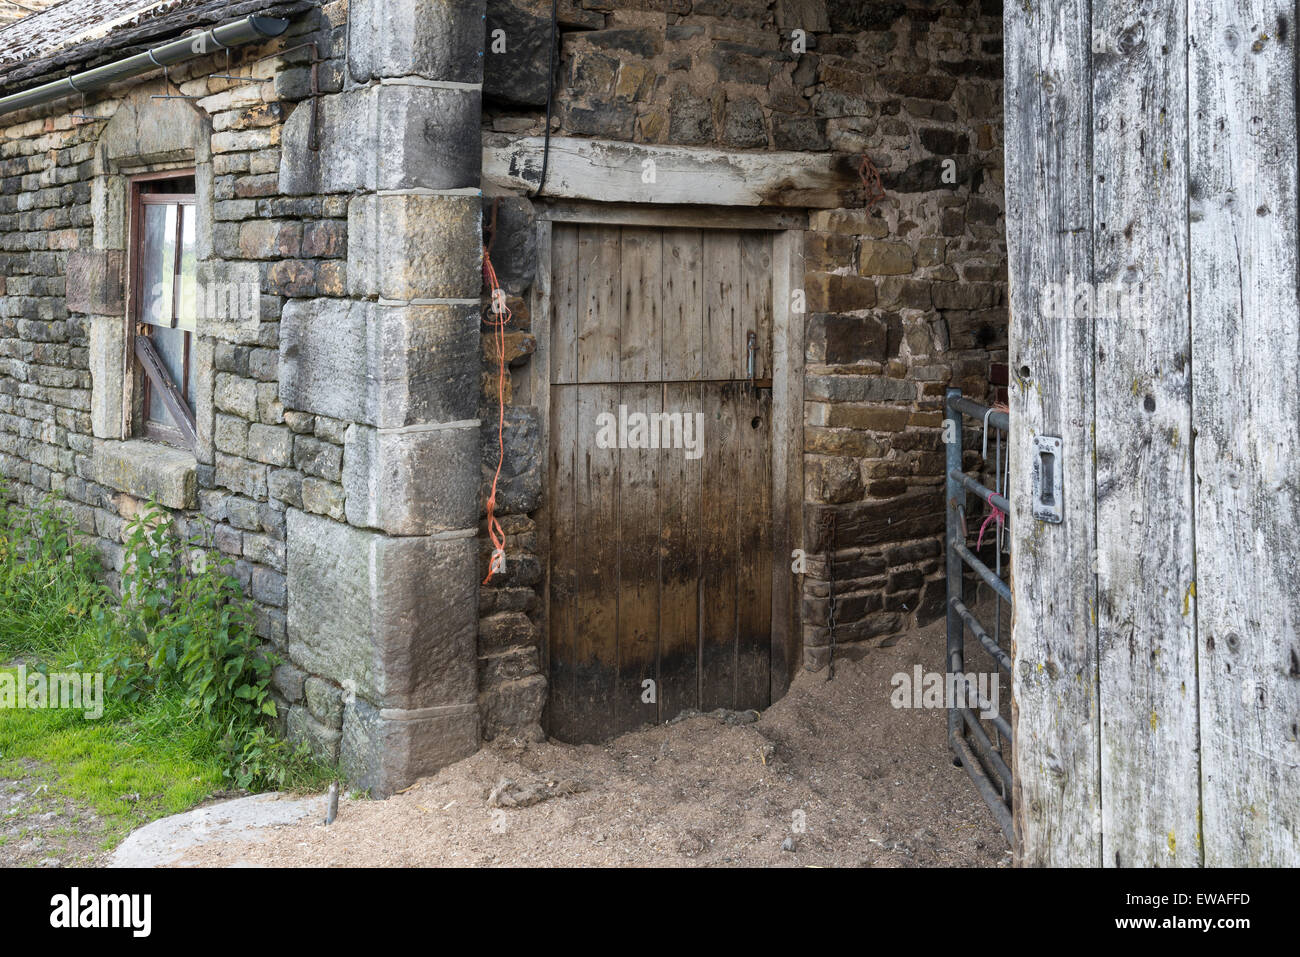 Old farm buildings in Northern England with stone walls and weathered wooden doors. Stock Photo